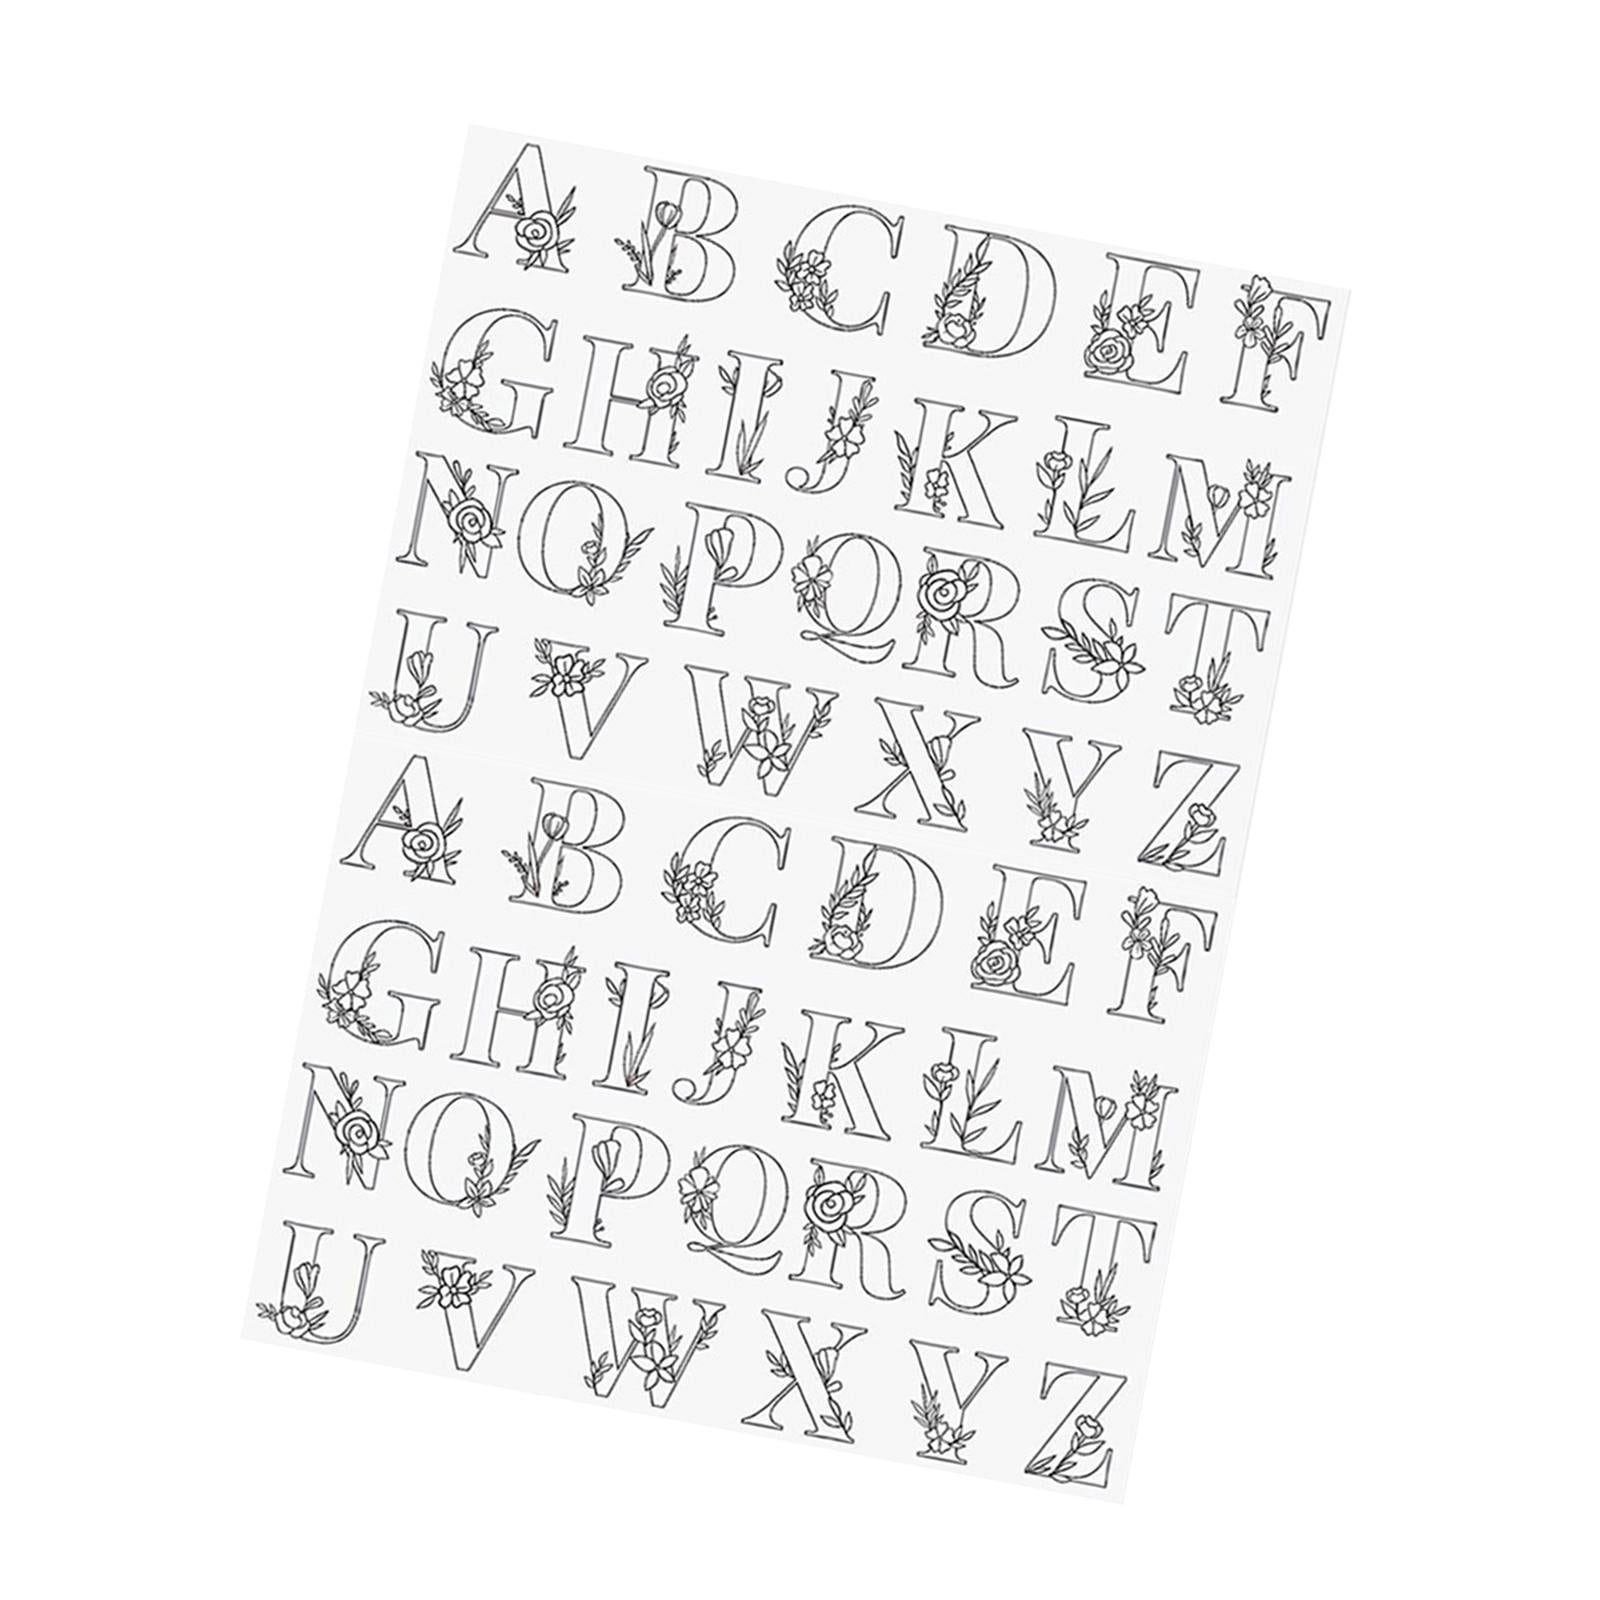  TOPPERFUN 2pcs Embroidery Paper Embroidery Alphabet Stencils Embroidery  Stencils Tearable Stabilizer for Embroidery Dissolvable Embroidery  Stabilizer Sewing Tools Soluble Bottom Fabric : Arts, Crafts & Sewing